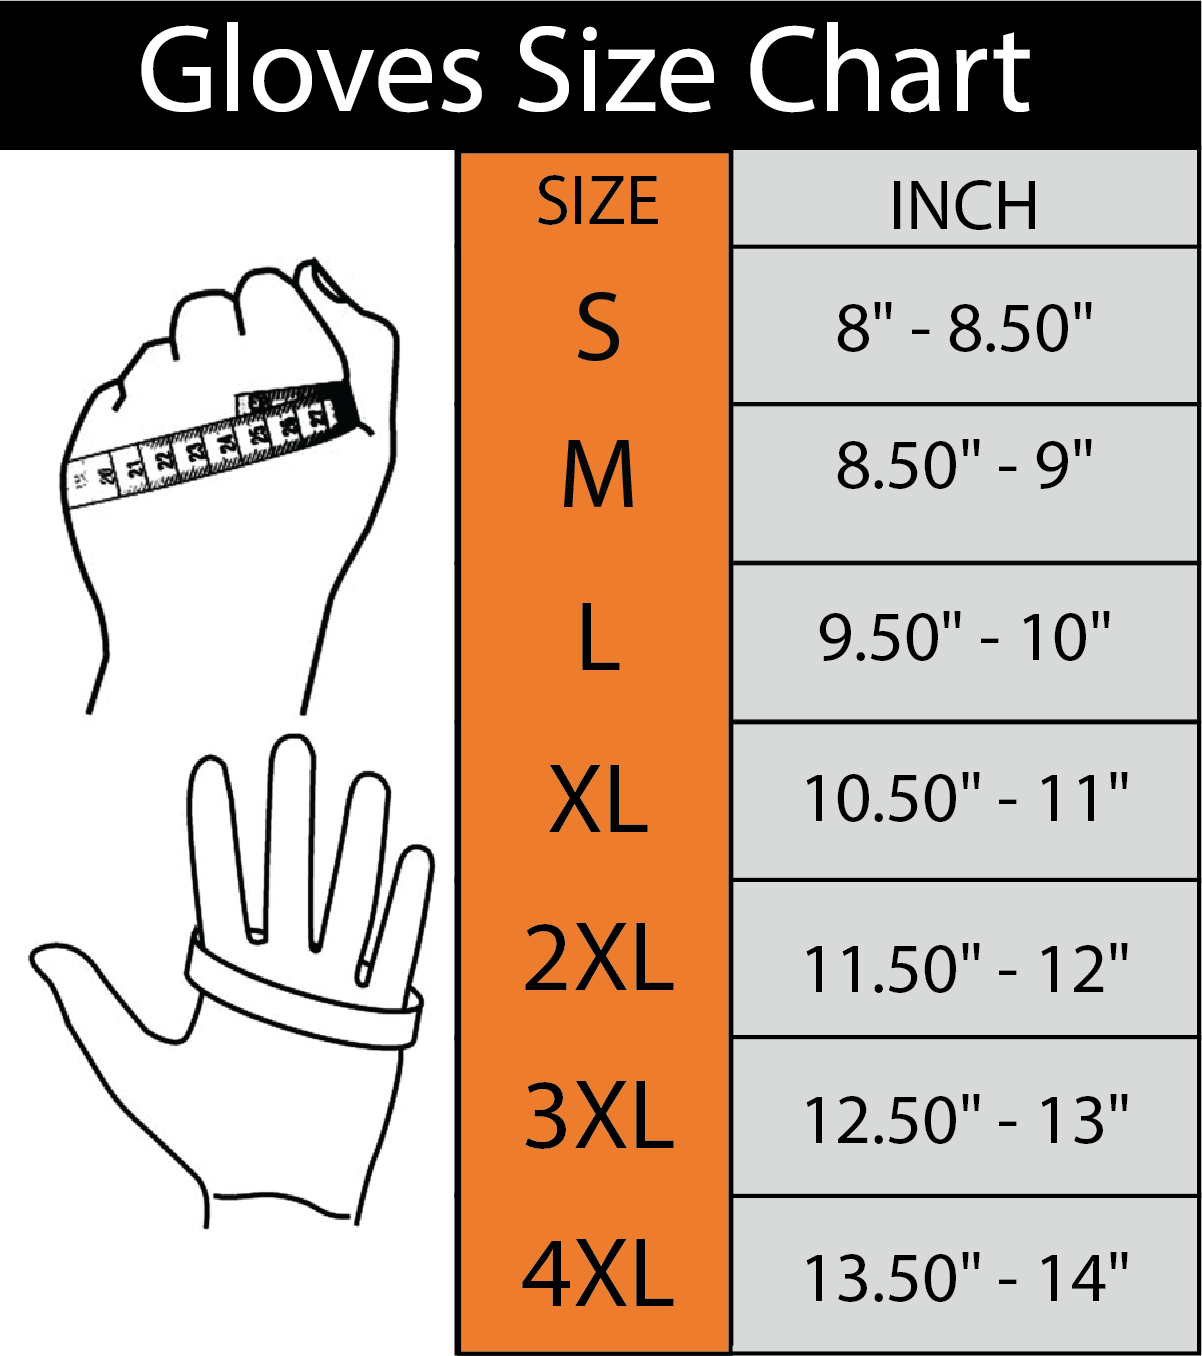 Size chart for raincover leather gauntlet gloves.